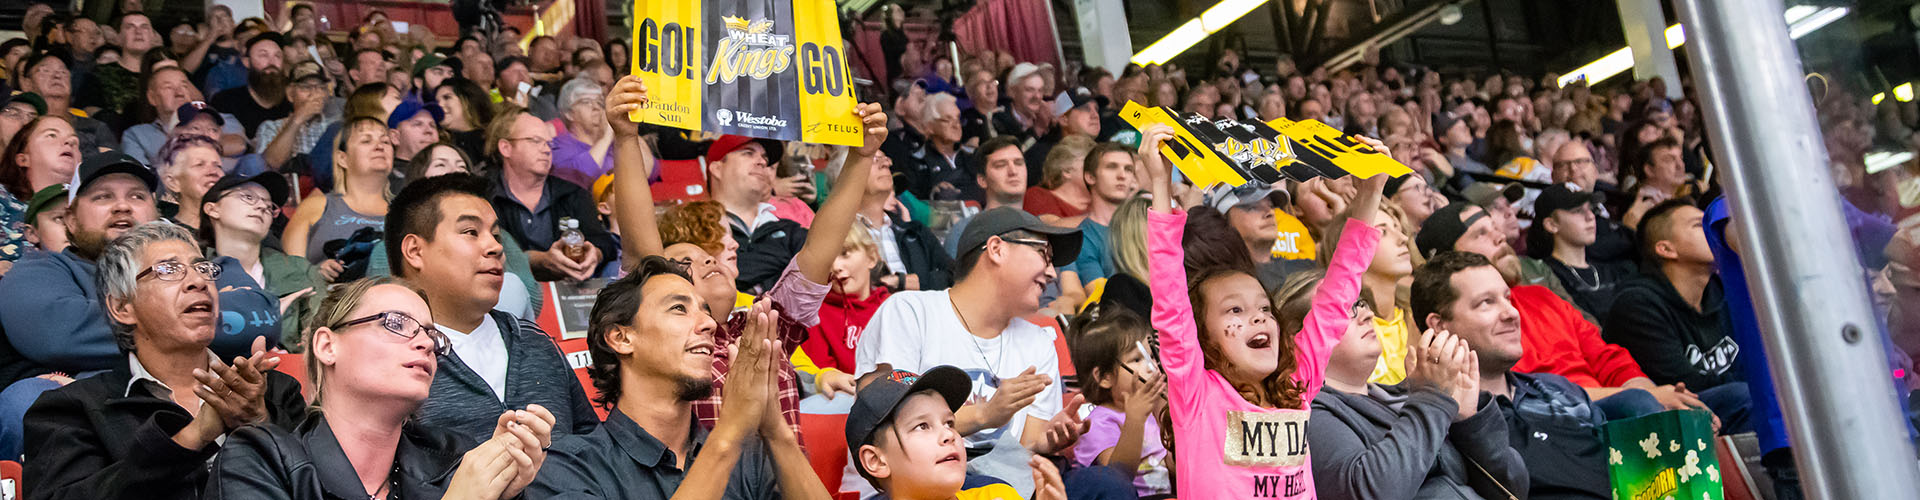 Fans cheering on the Wheat Kings in Brandon, Manitoba